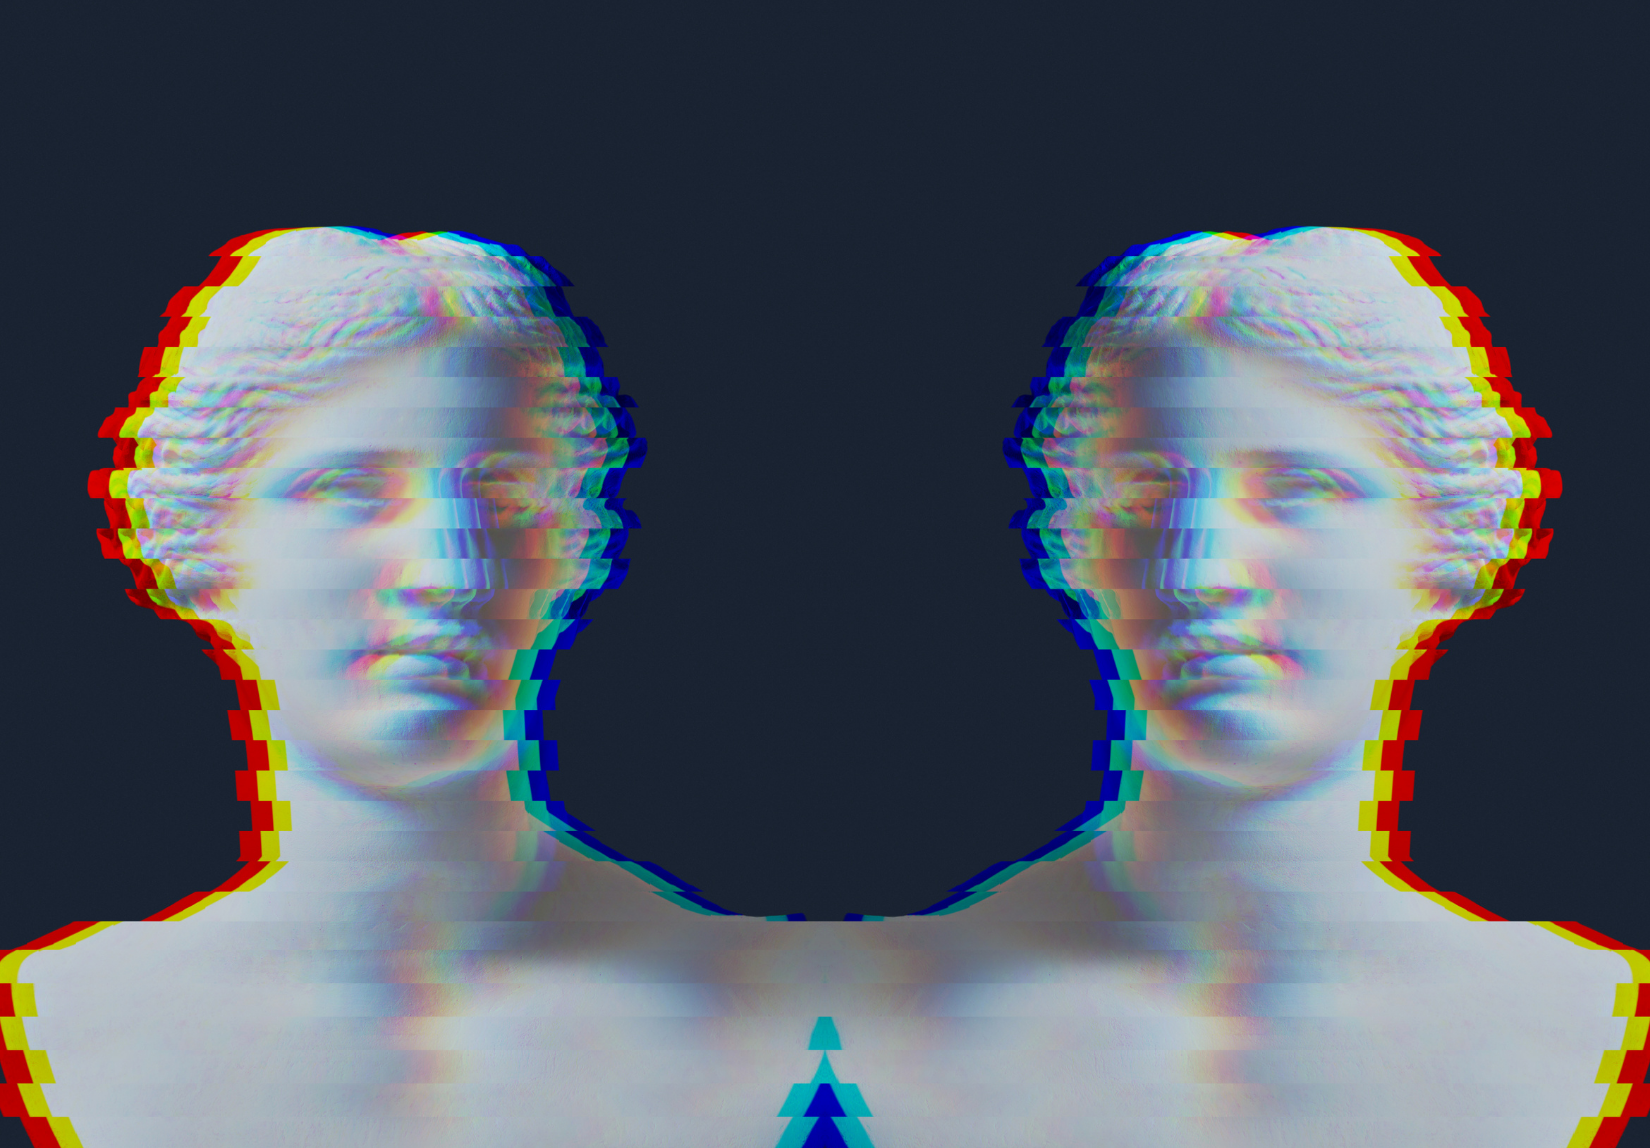 Statue of a woman's head and shoulders with a glitch effect on a black background